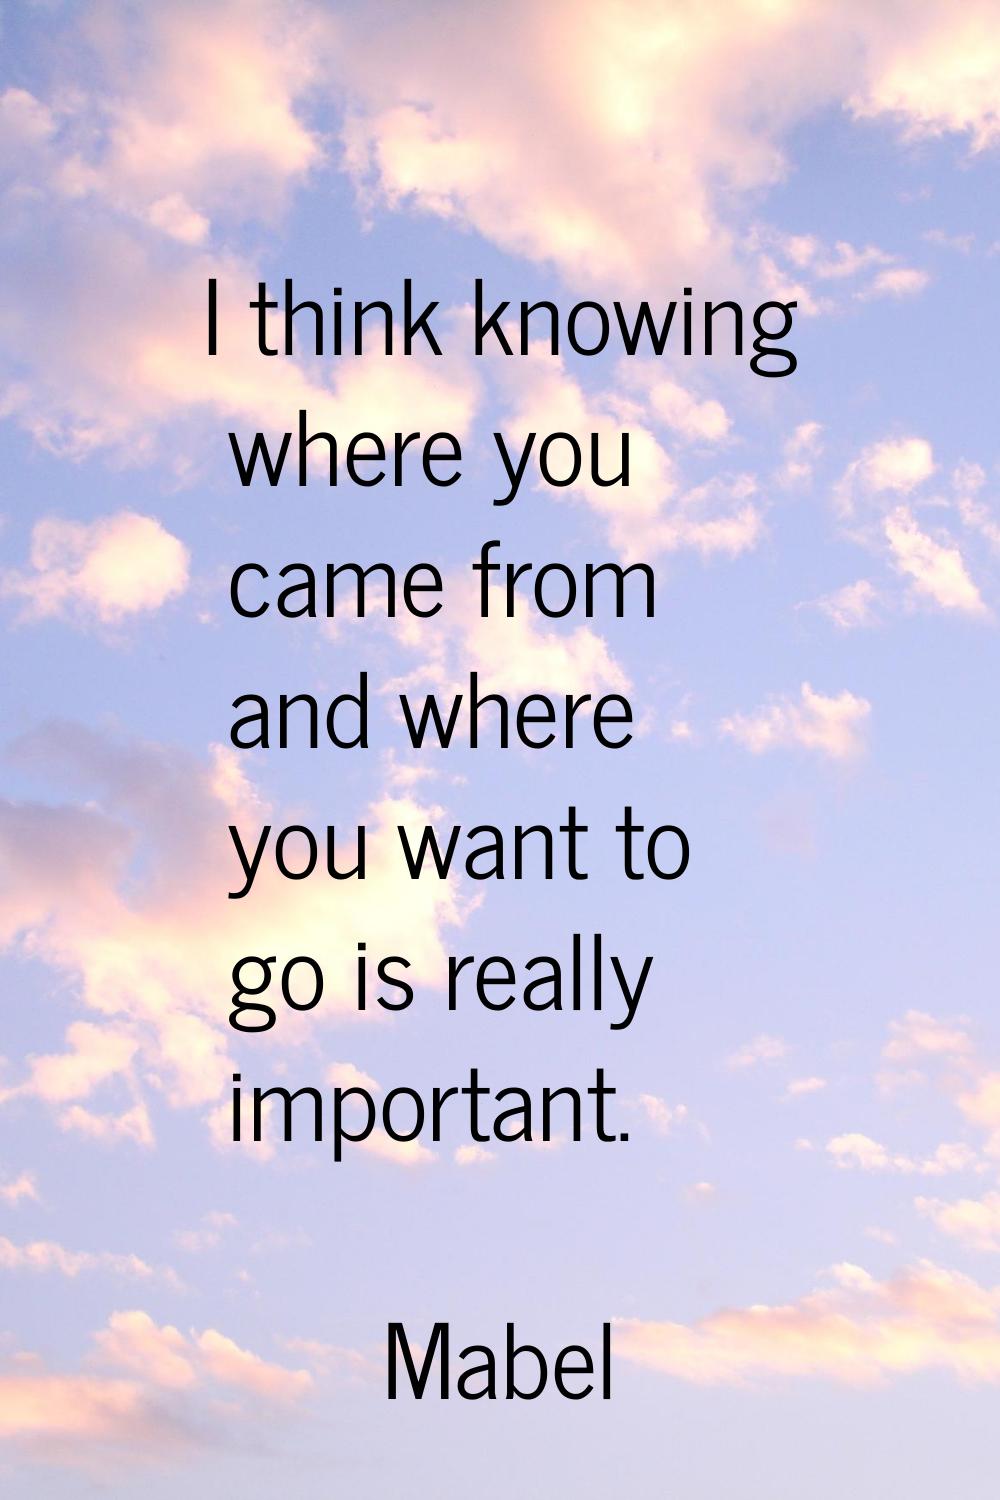 I think knowing where you came from and where you want to go is really important.